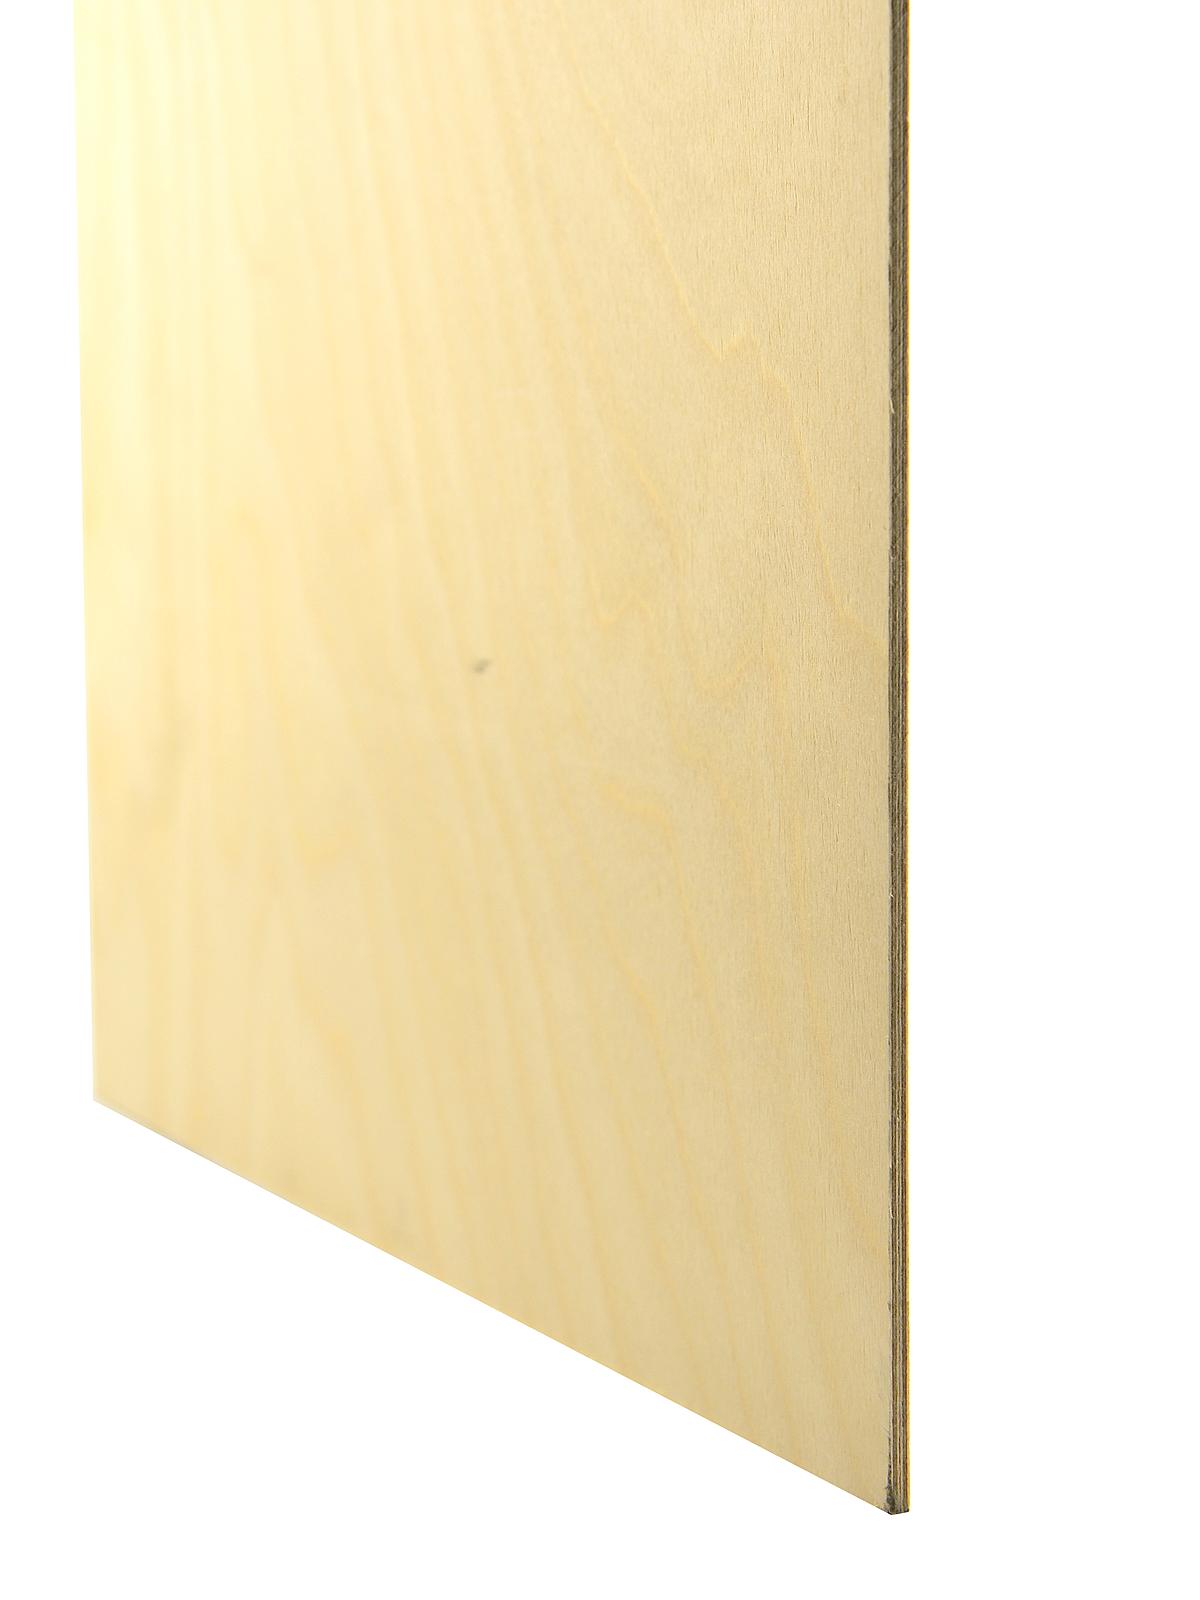 Thin Birch Plywood Aircraft Grade 1 8 In. 12 In. X 24 In.